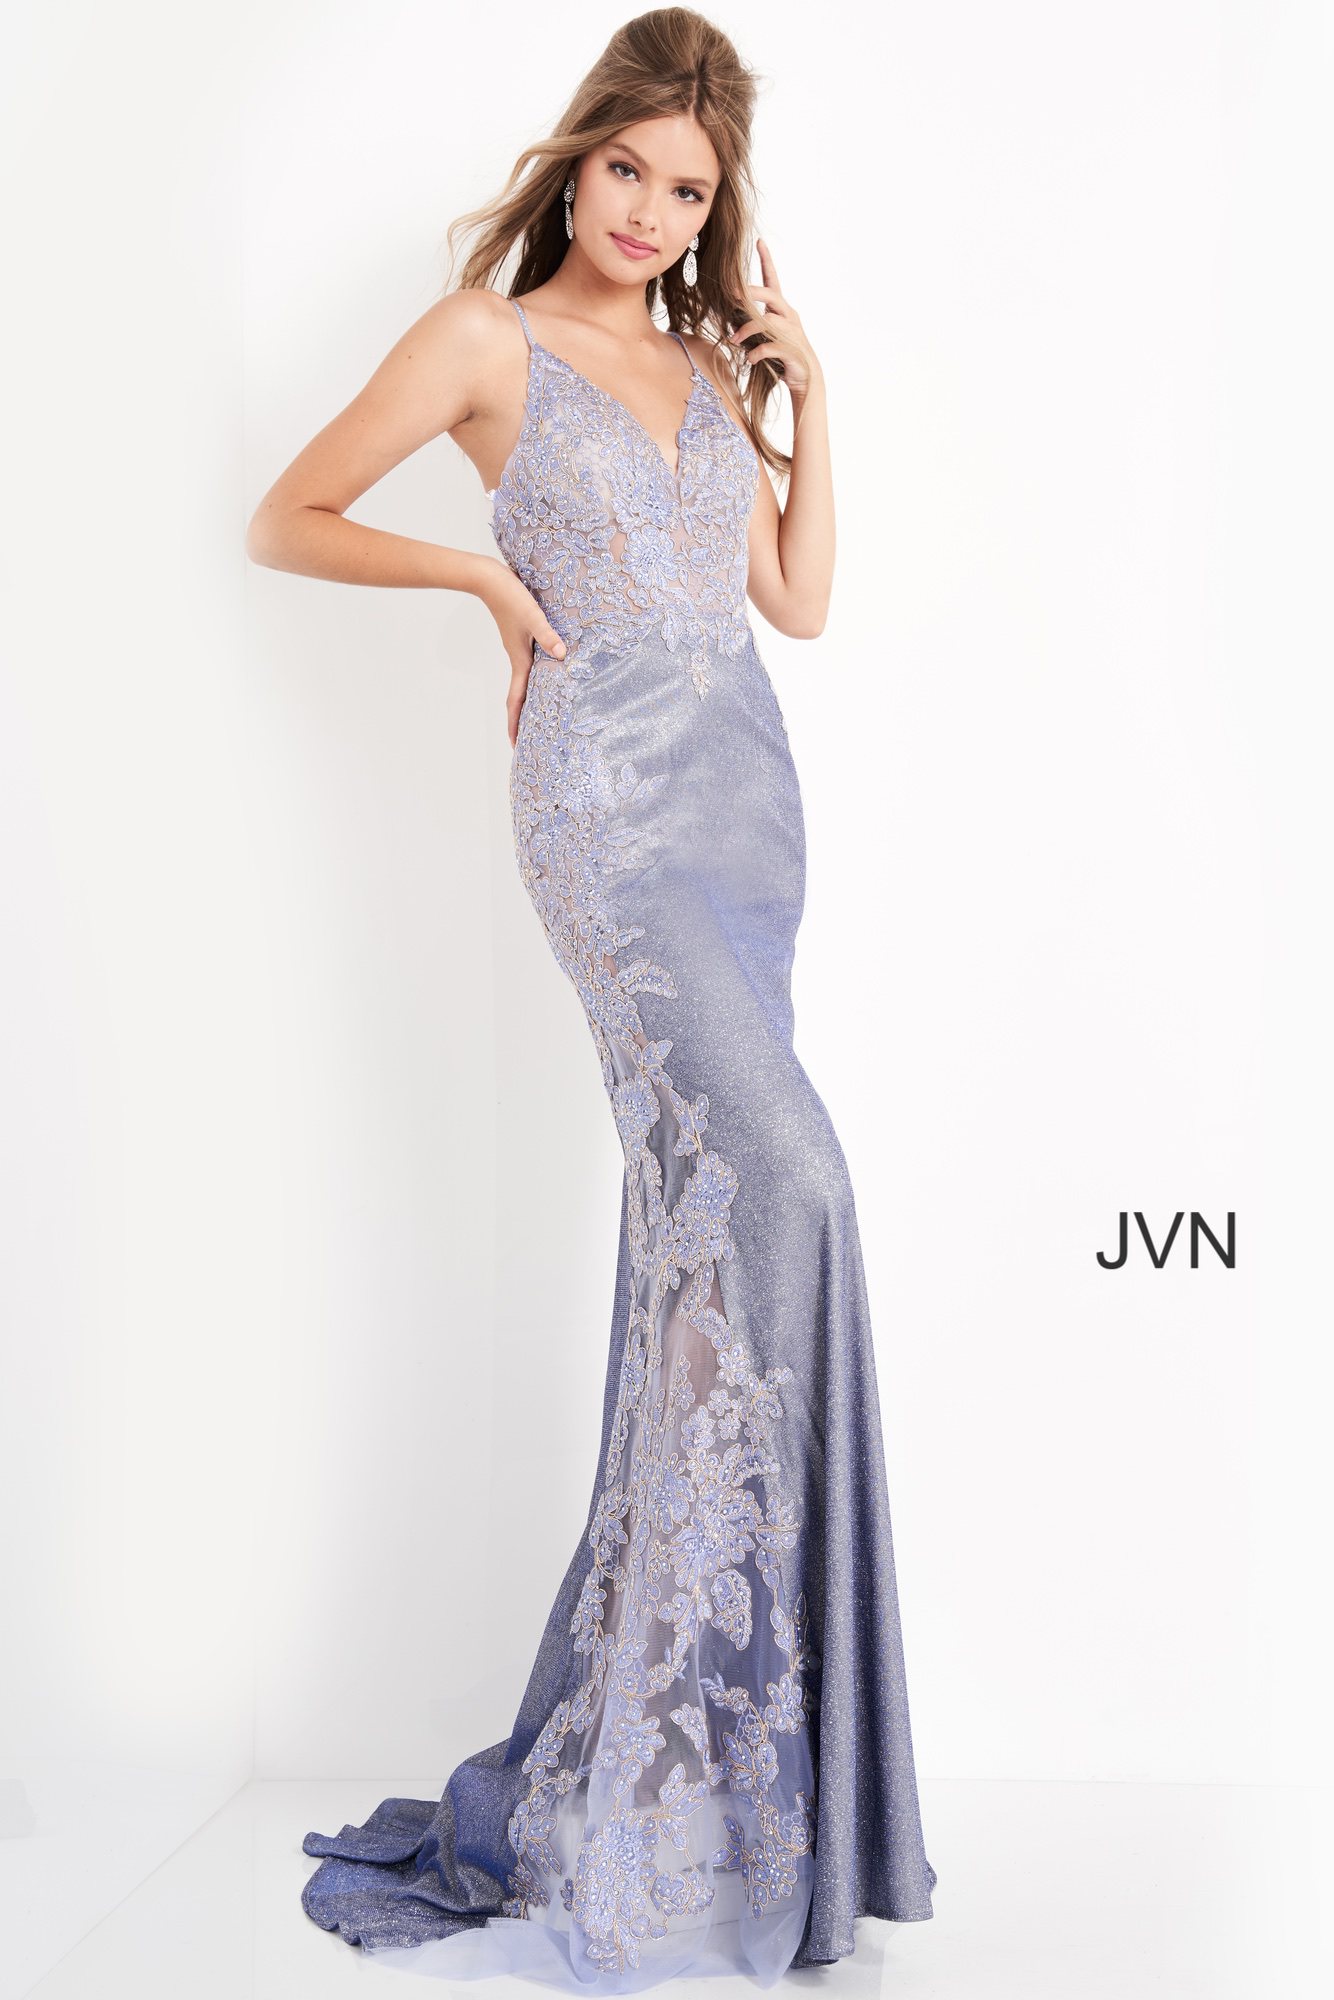 JVN2205 | Nude Sheer Embroidered Bodice Prom Dress